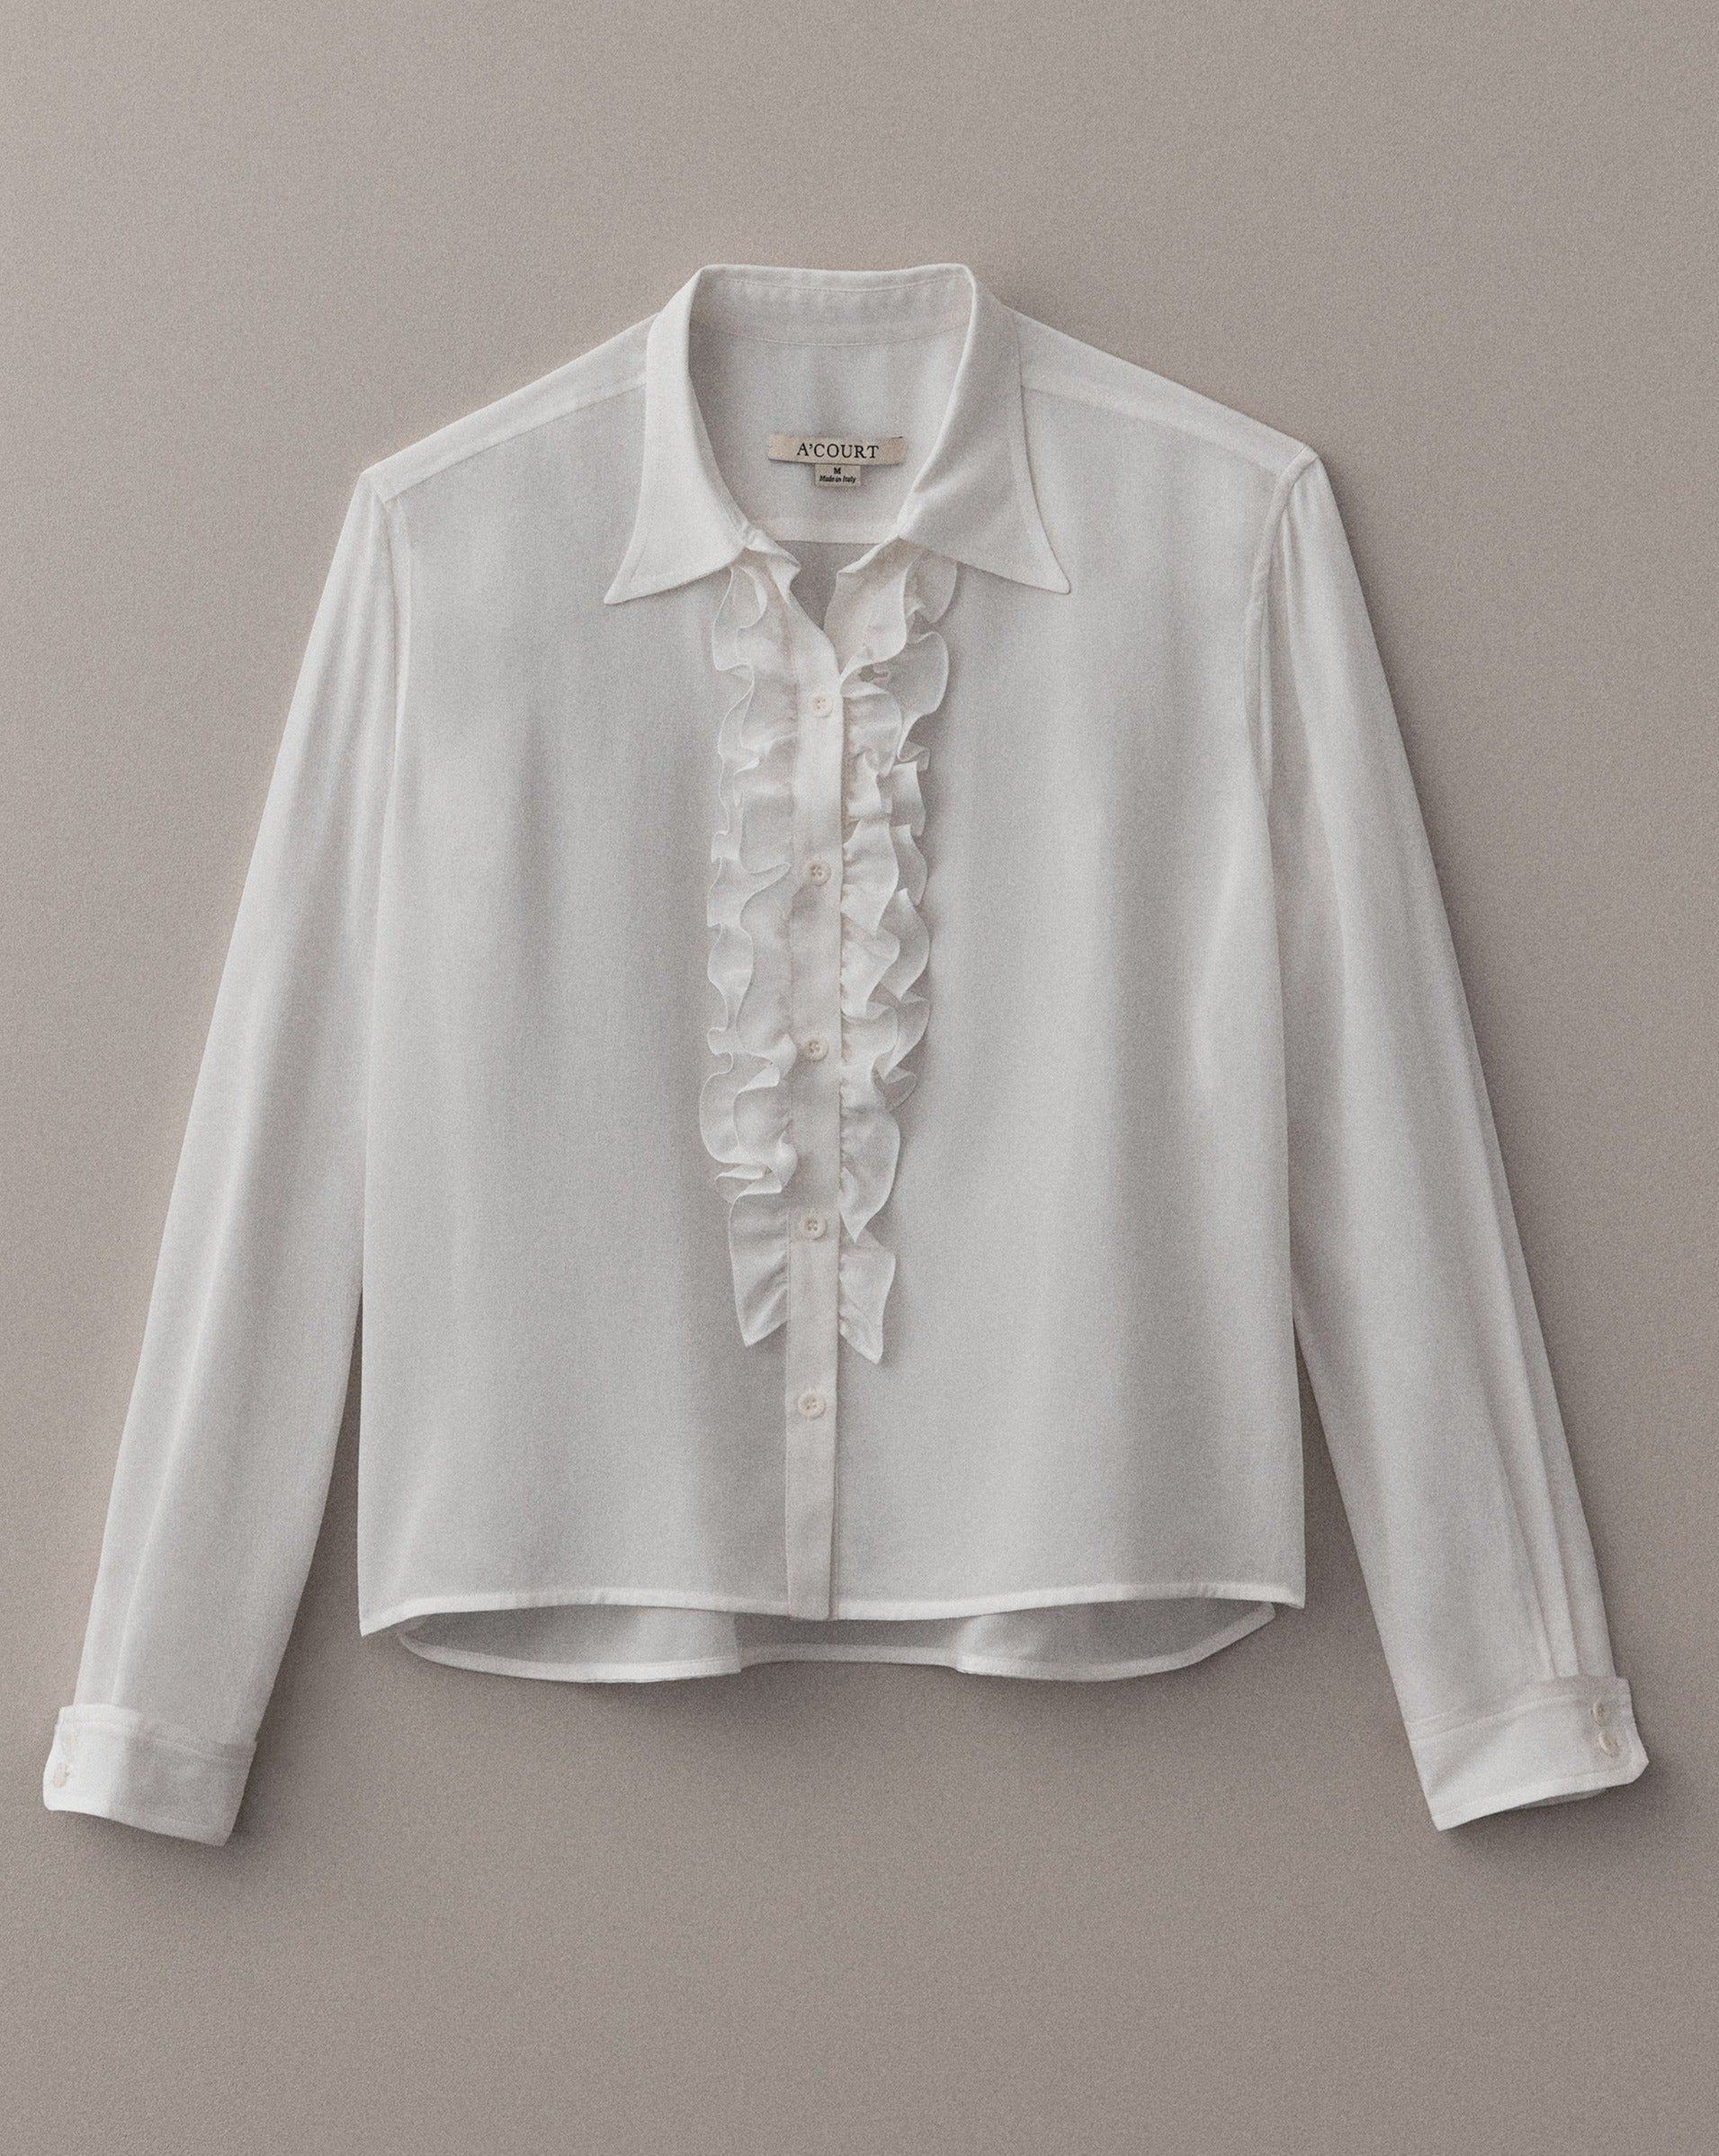 A long sleeve cream silk button-down with ruffled fabric at the placket and cuffs lies flat on a light brown field.